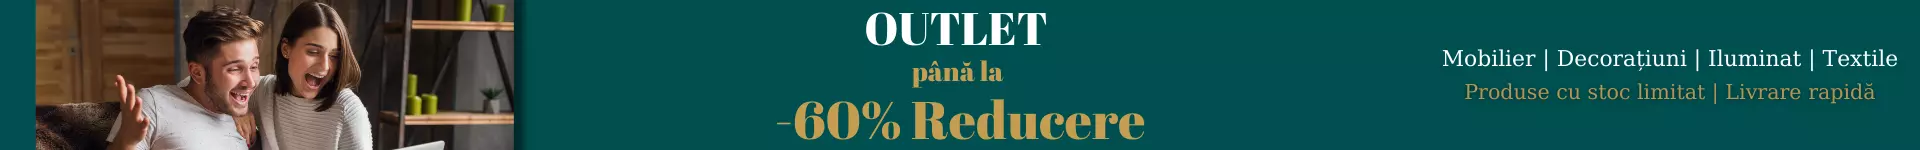 Outlet Iedera